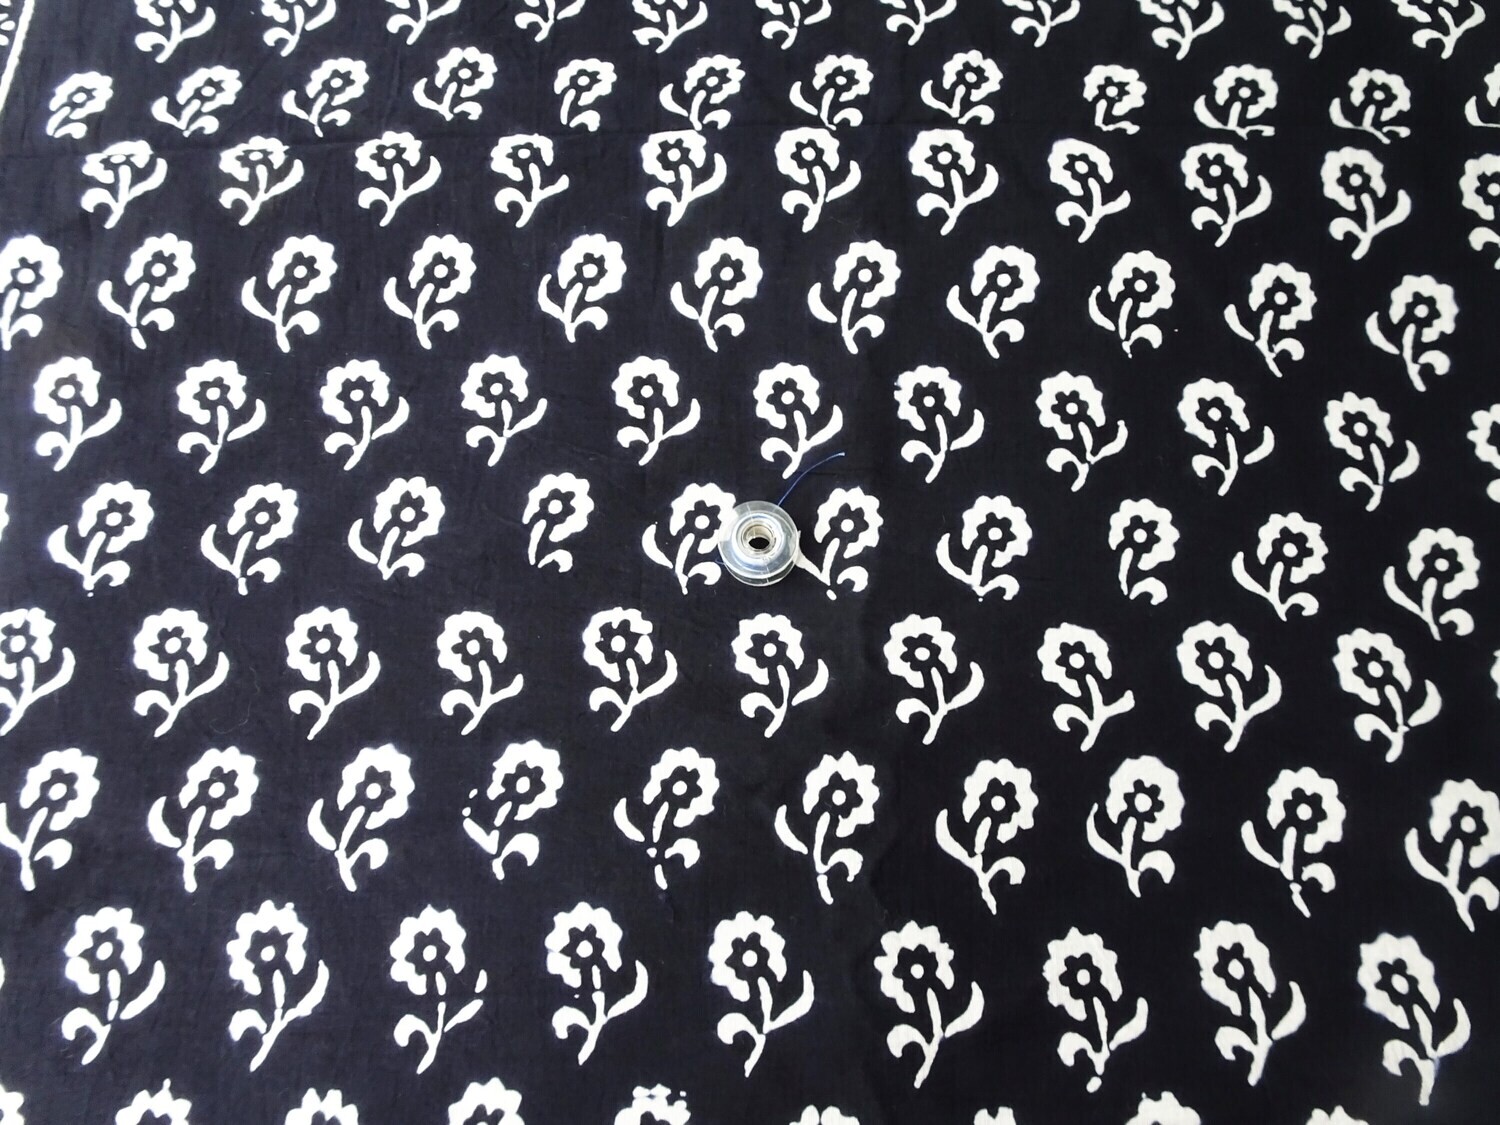 Black Floral Hand Block Print Cotton Fabric for Dress Materials, Quilting, Sewing, 44 inches wide